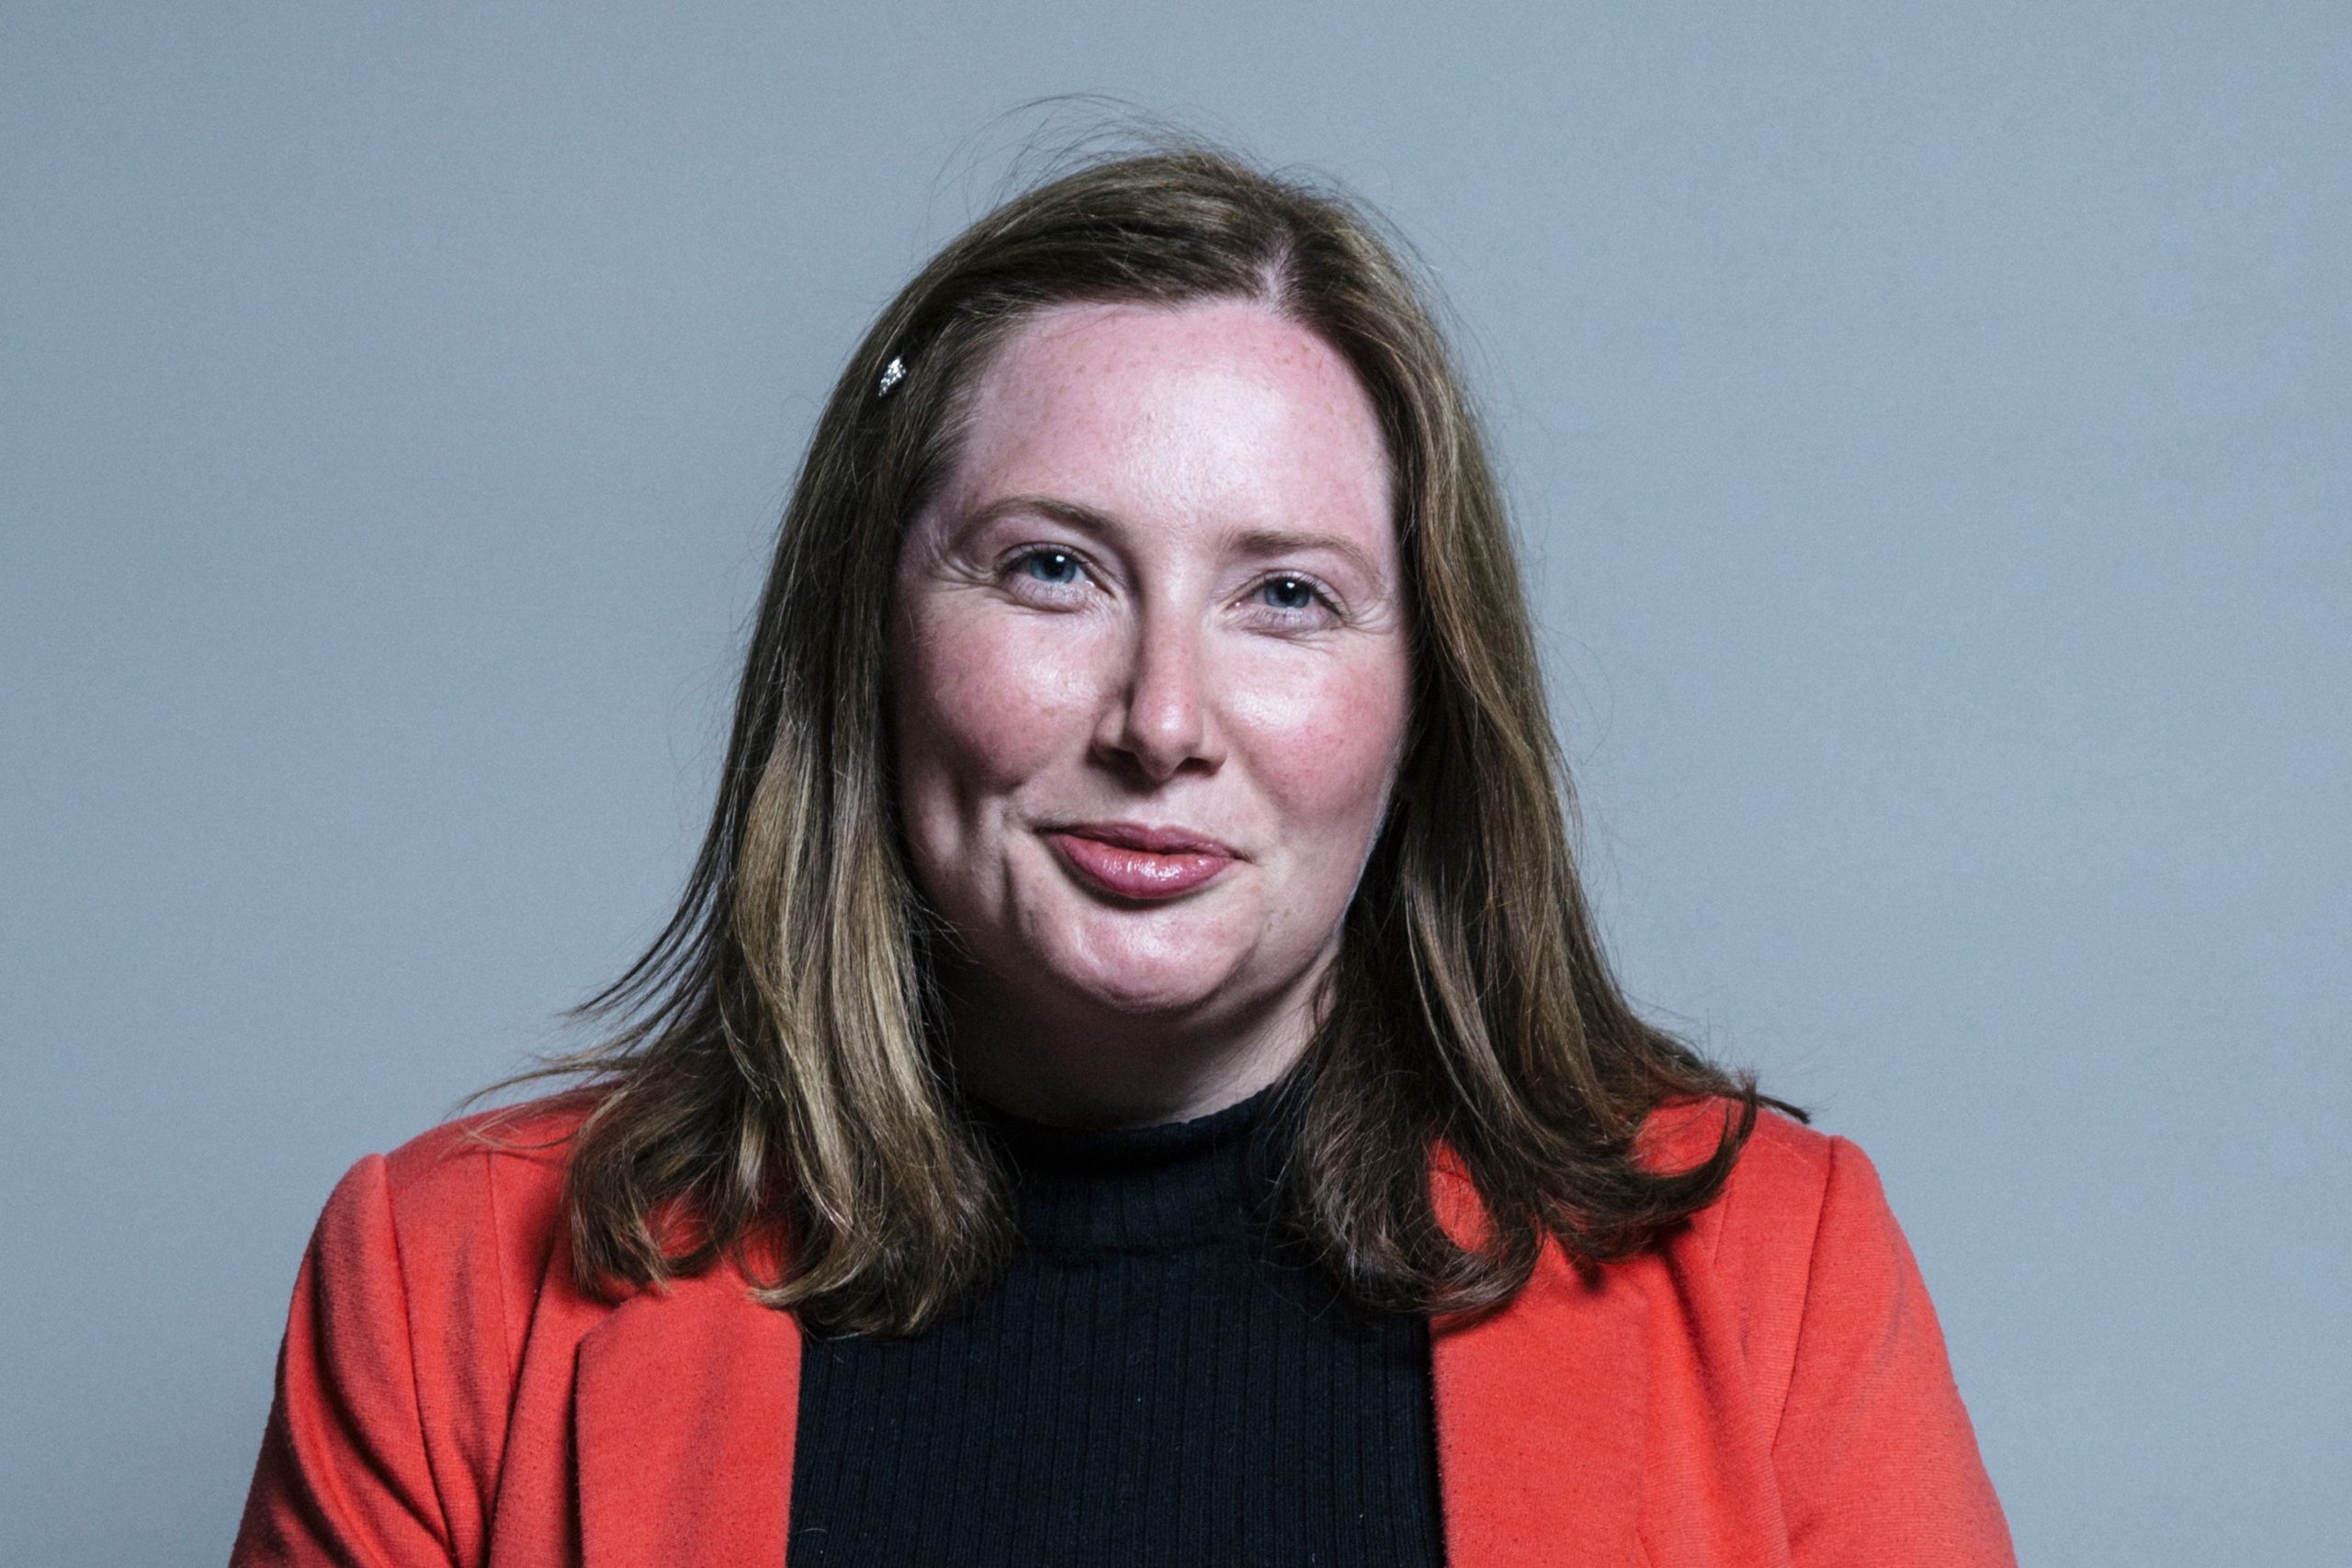 Emma Lewell-Buck, the Labour MP of South Shields, is posing in front of a grey background.